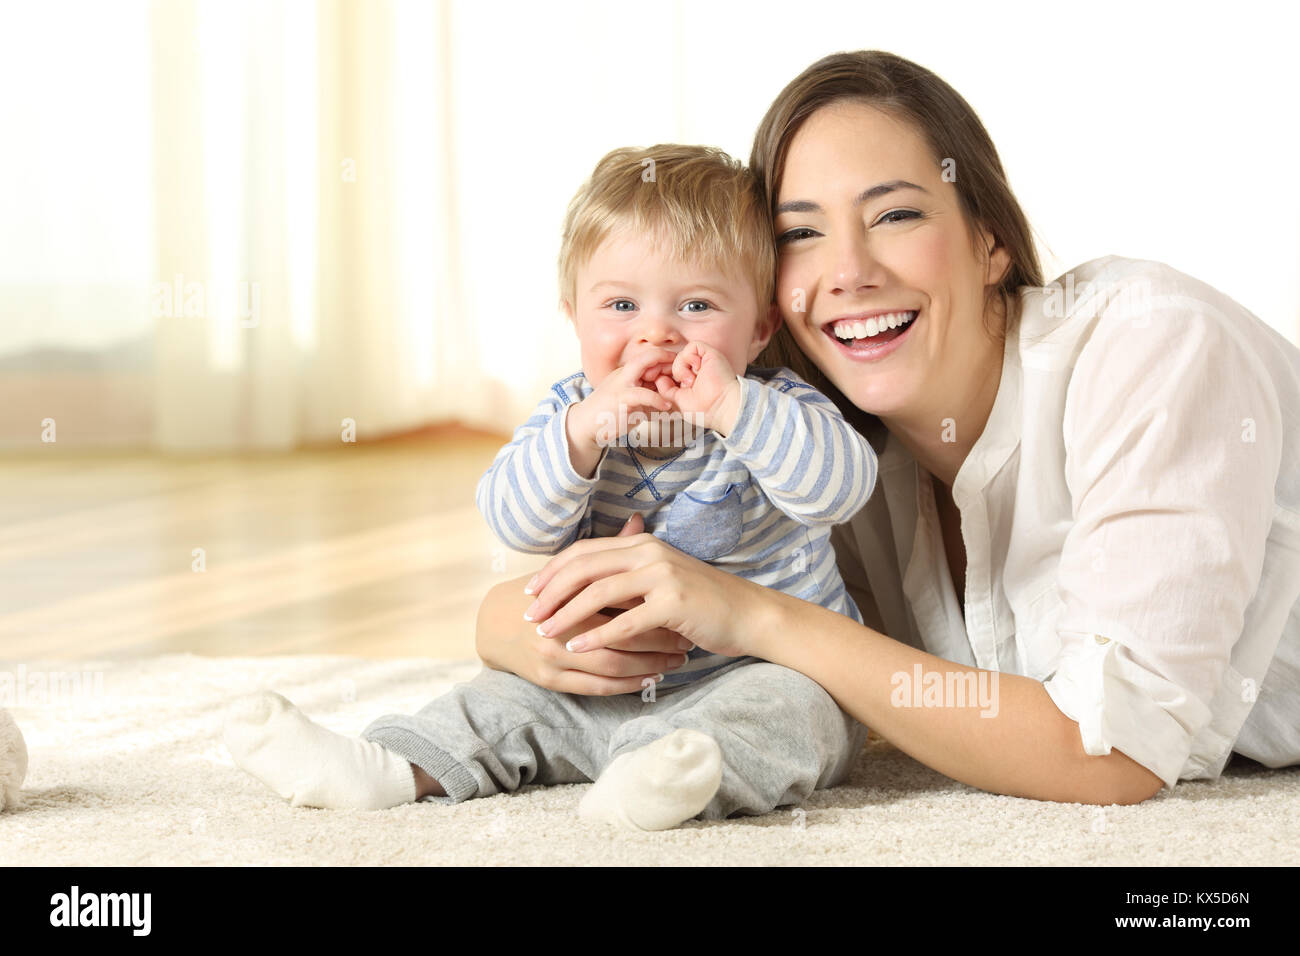 Smiley mother and her baby looking at you lying on the floor at home Stock Photo